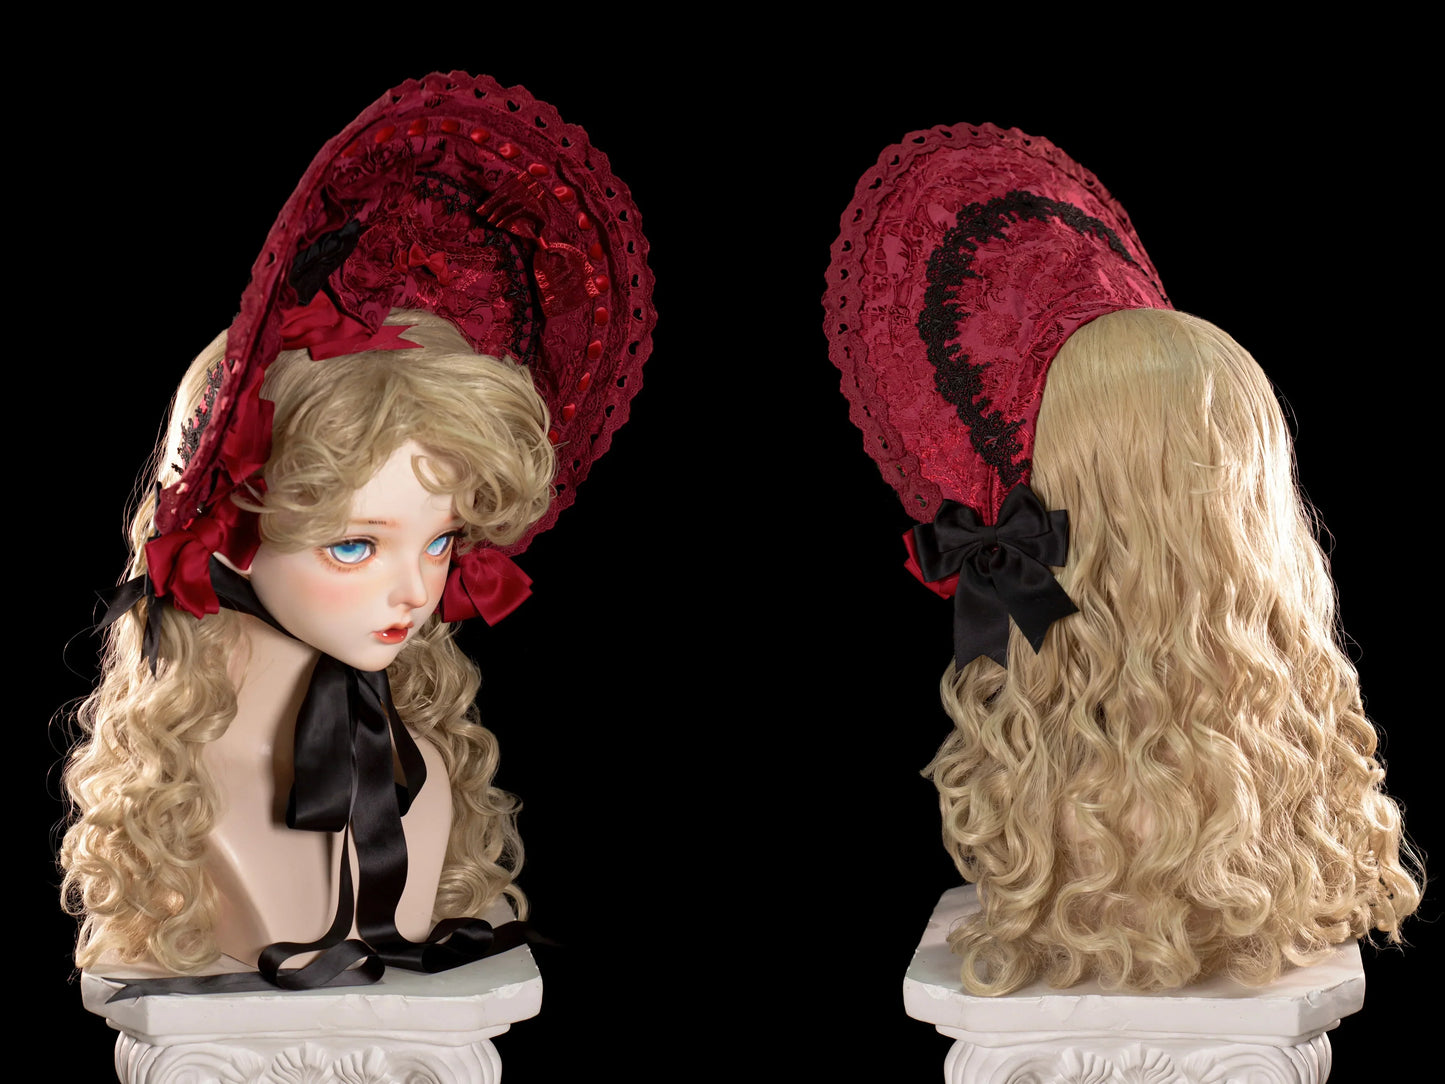 Simultaneous purchase only [Orders accepted until 5/24] Hybrid Doll Moon Island Bonnet